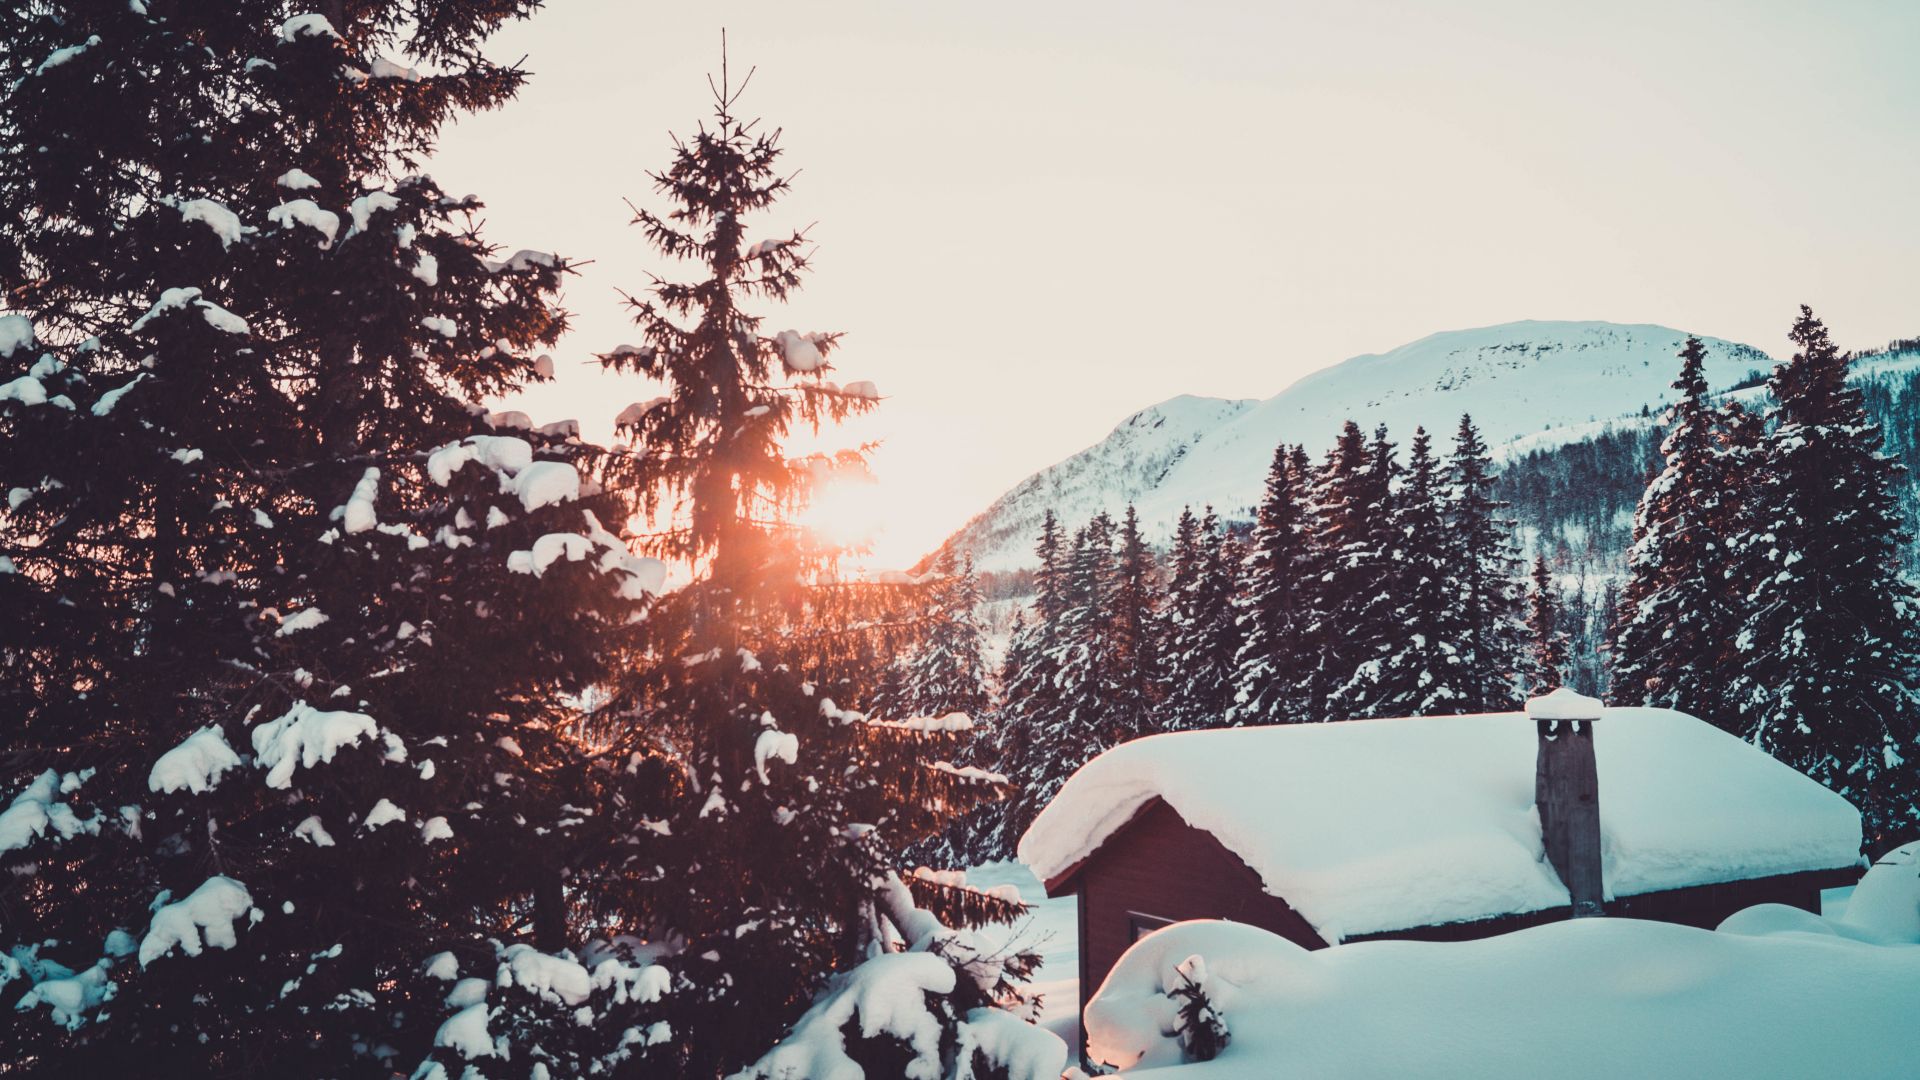 Desktop wallpaper cabin, winter, snowfall, tree and mountains, sunrise, HD image, picture, background, b88d83